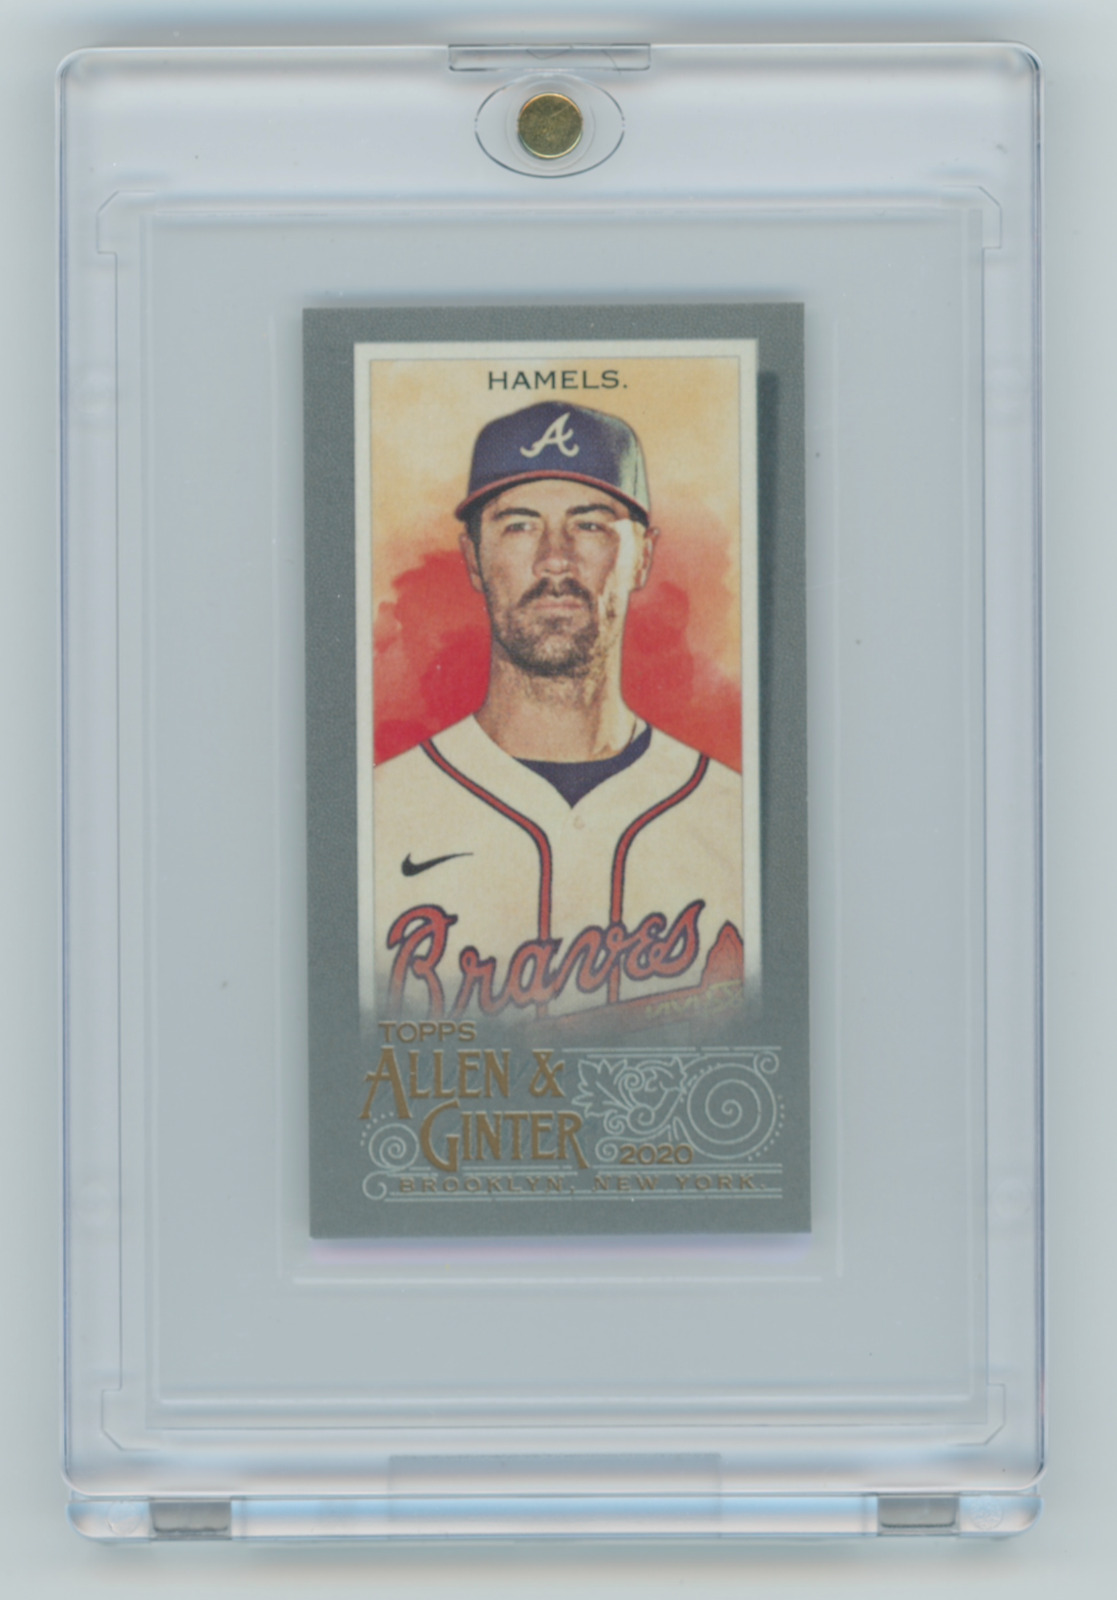 Cole Hamels 2020 Topps Allen & Ginter's X Mini Silver * 1/1 * #163